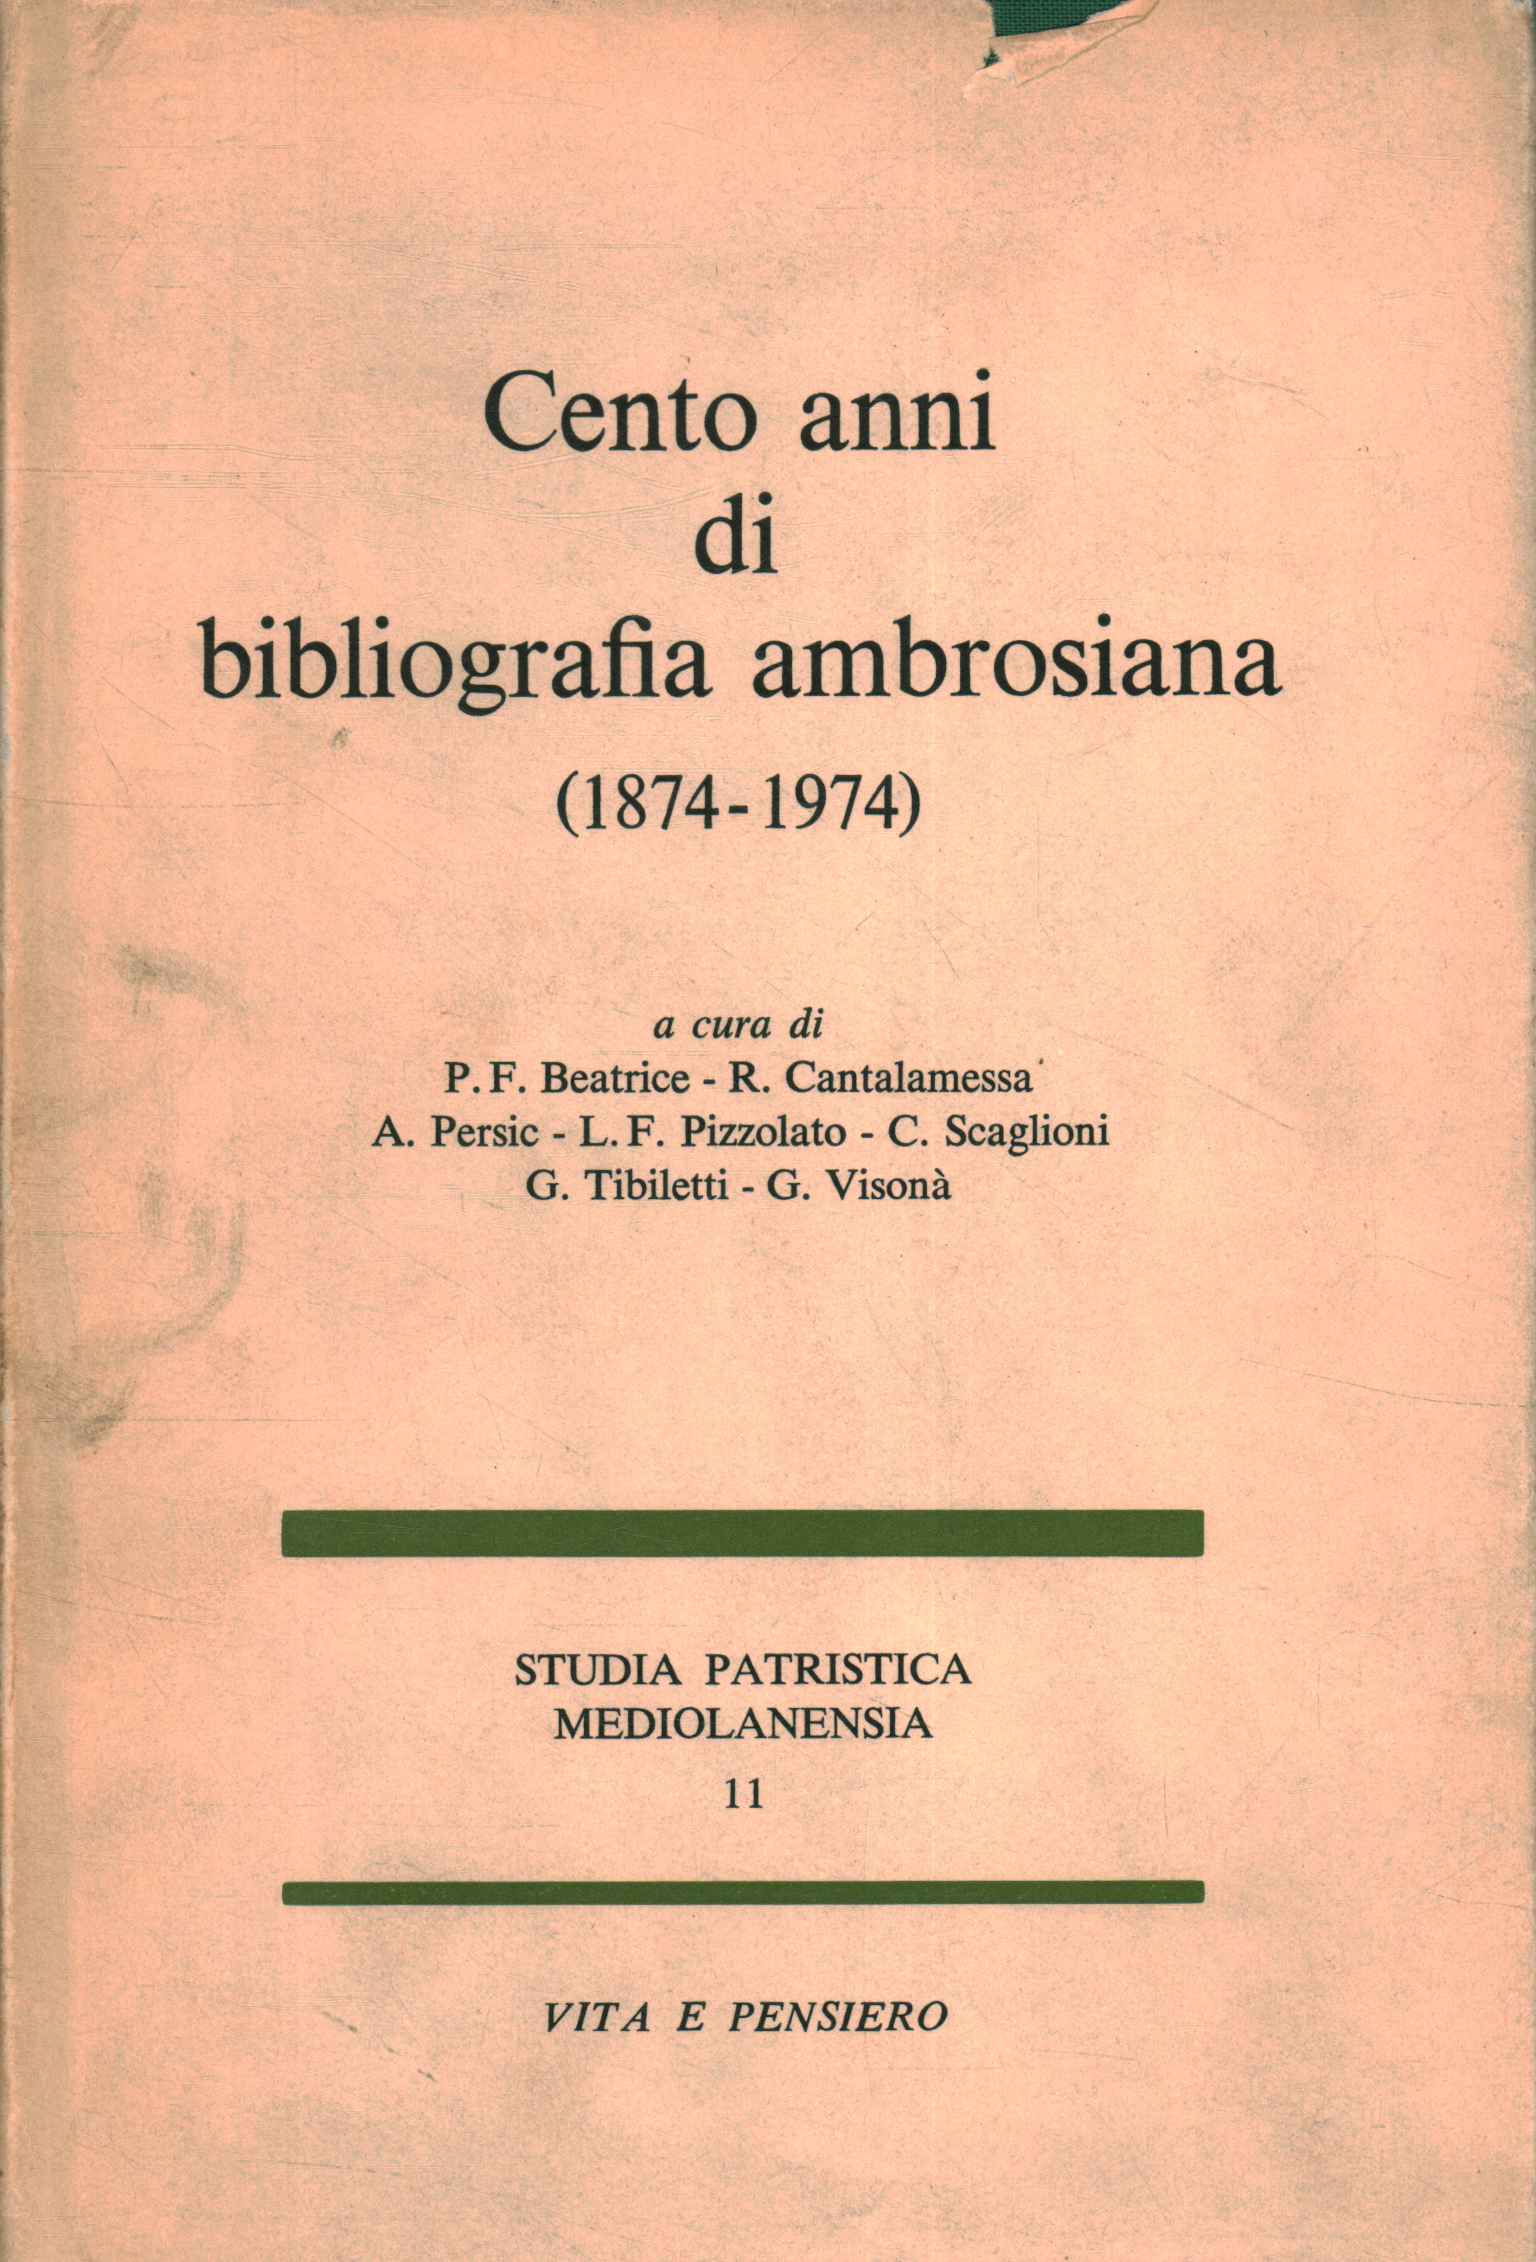 One hundred years of Ambrosian bibliography (1